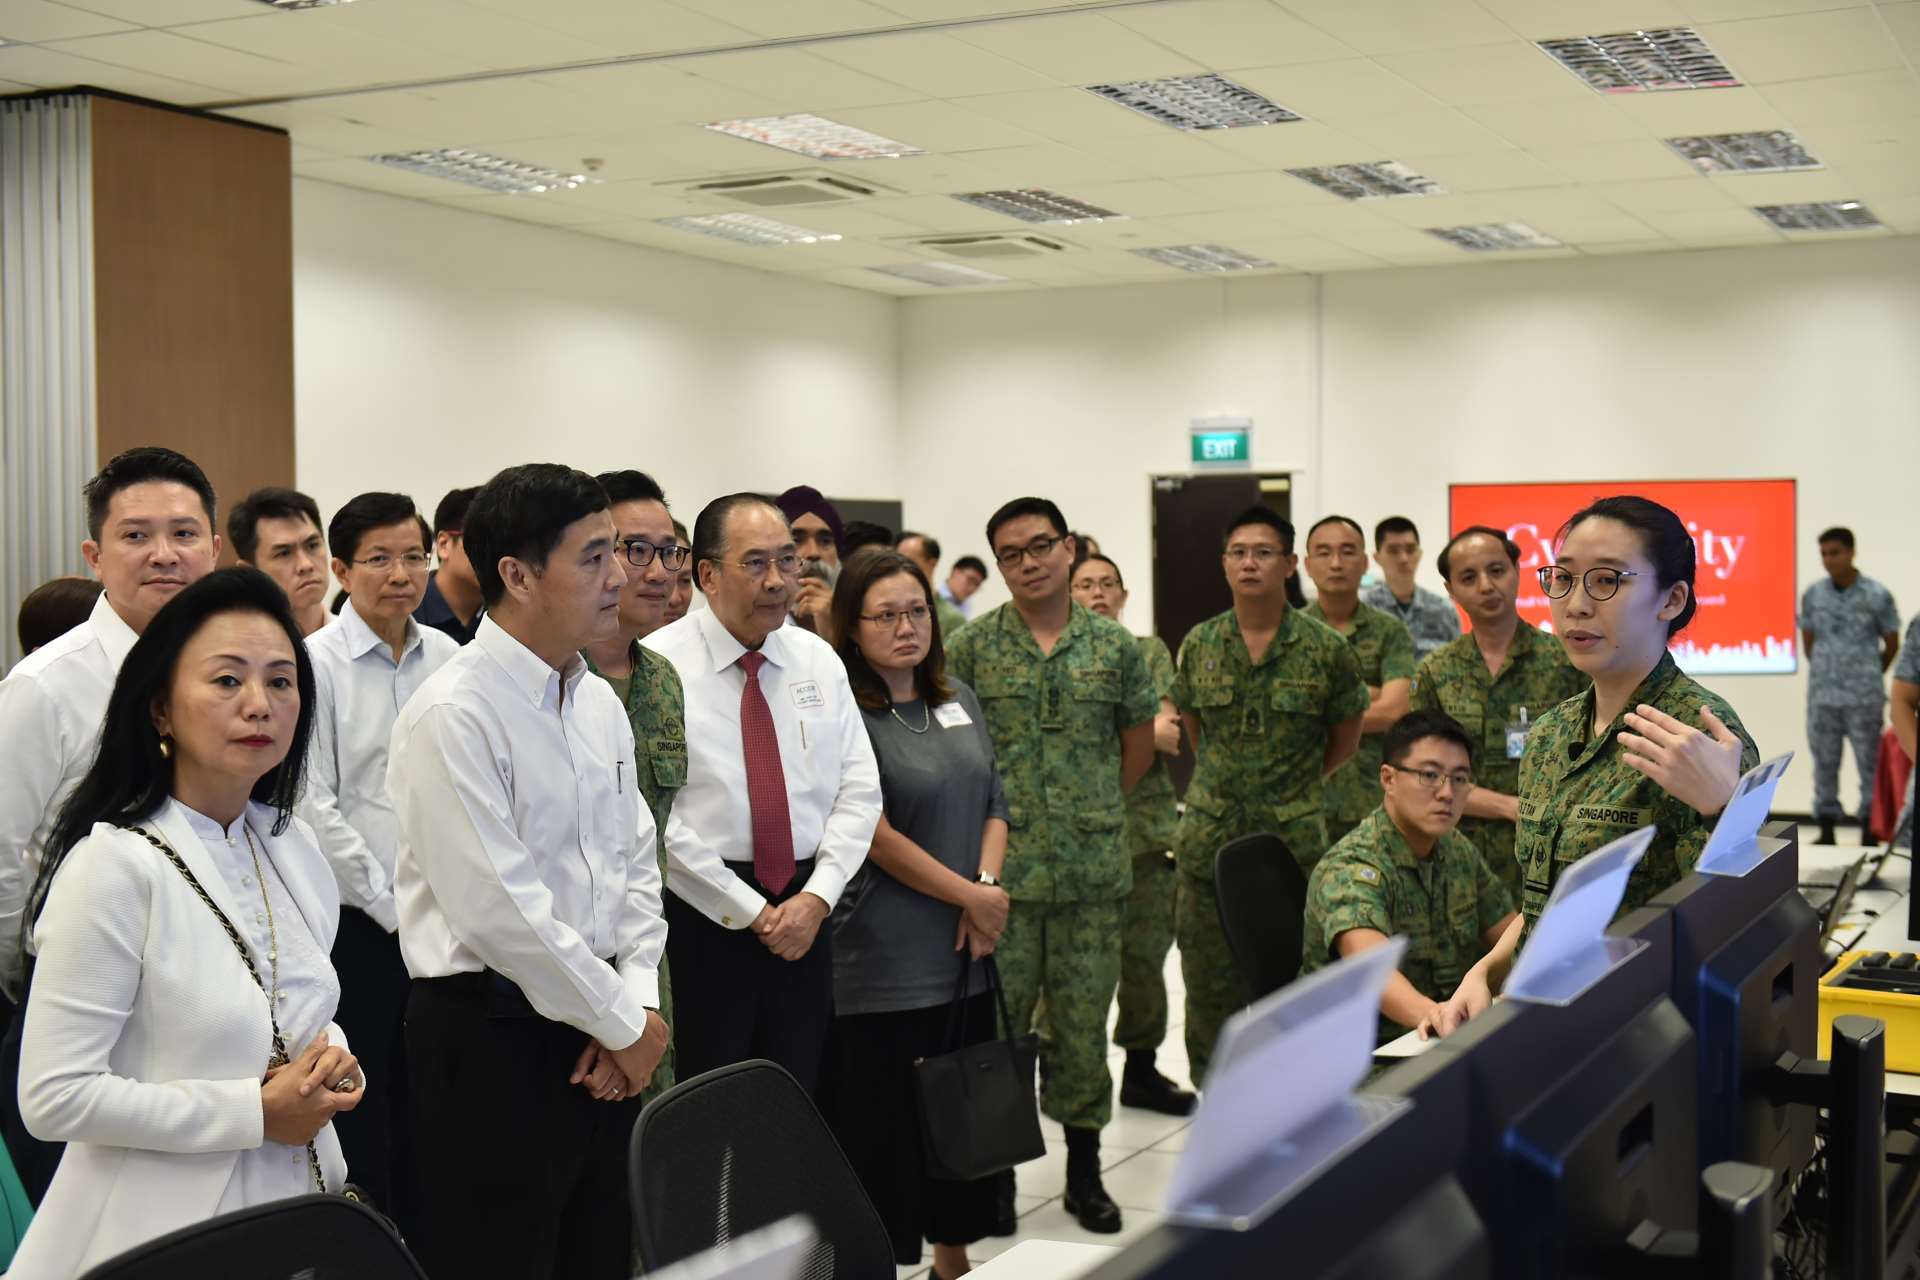 Mr Heng and ACCORD members watching cyber operators doing incident response team training at the Cyber Defence Test and Evaluation Centre (CyTEC).